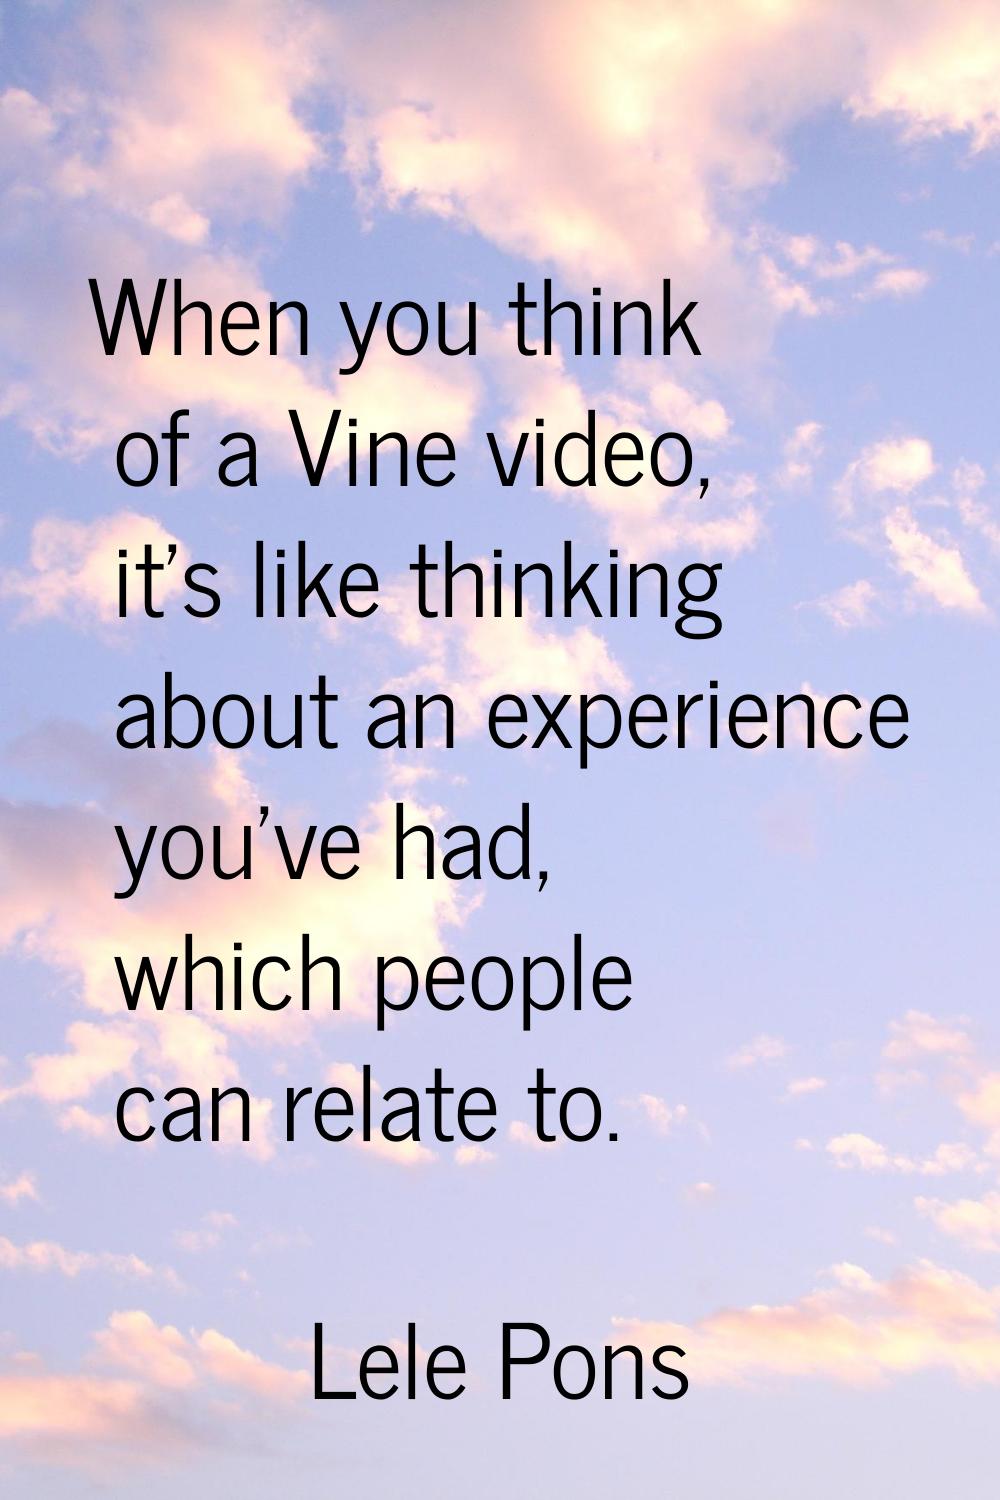 When you think of a Vine video, it's like thinking about an experience you've had, which people can